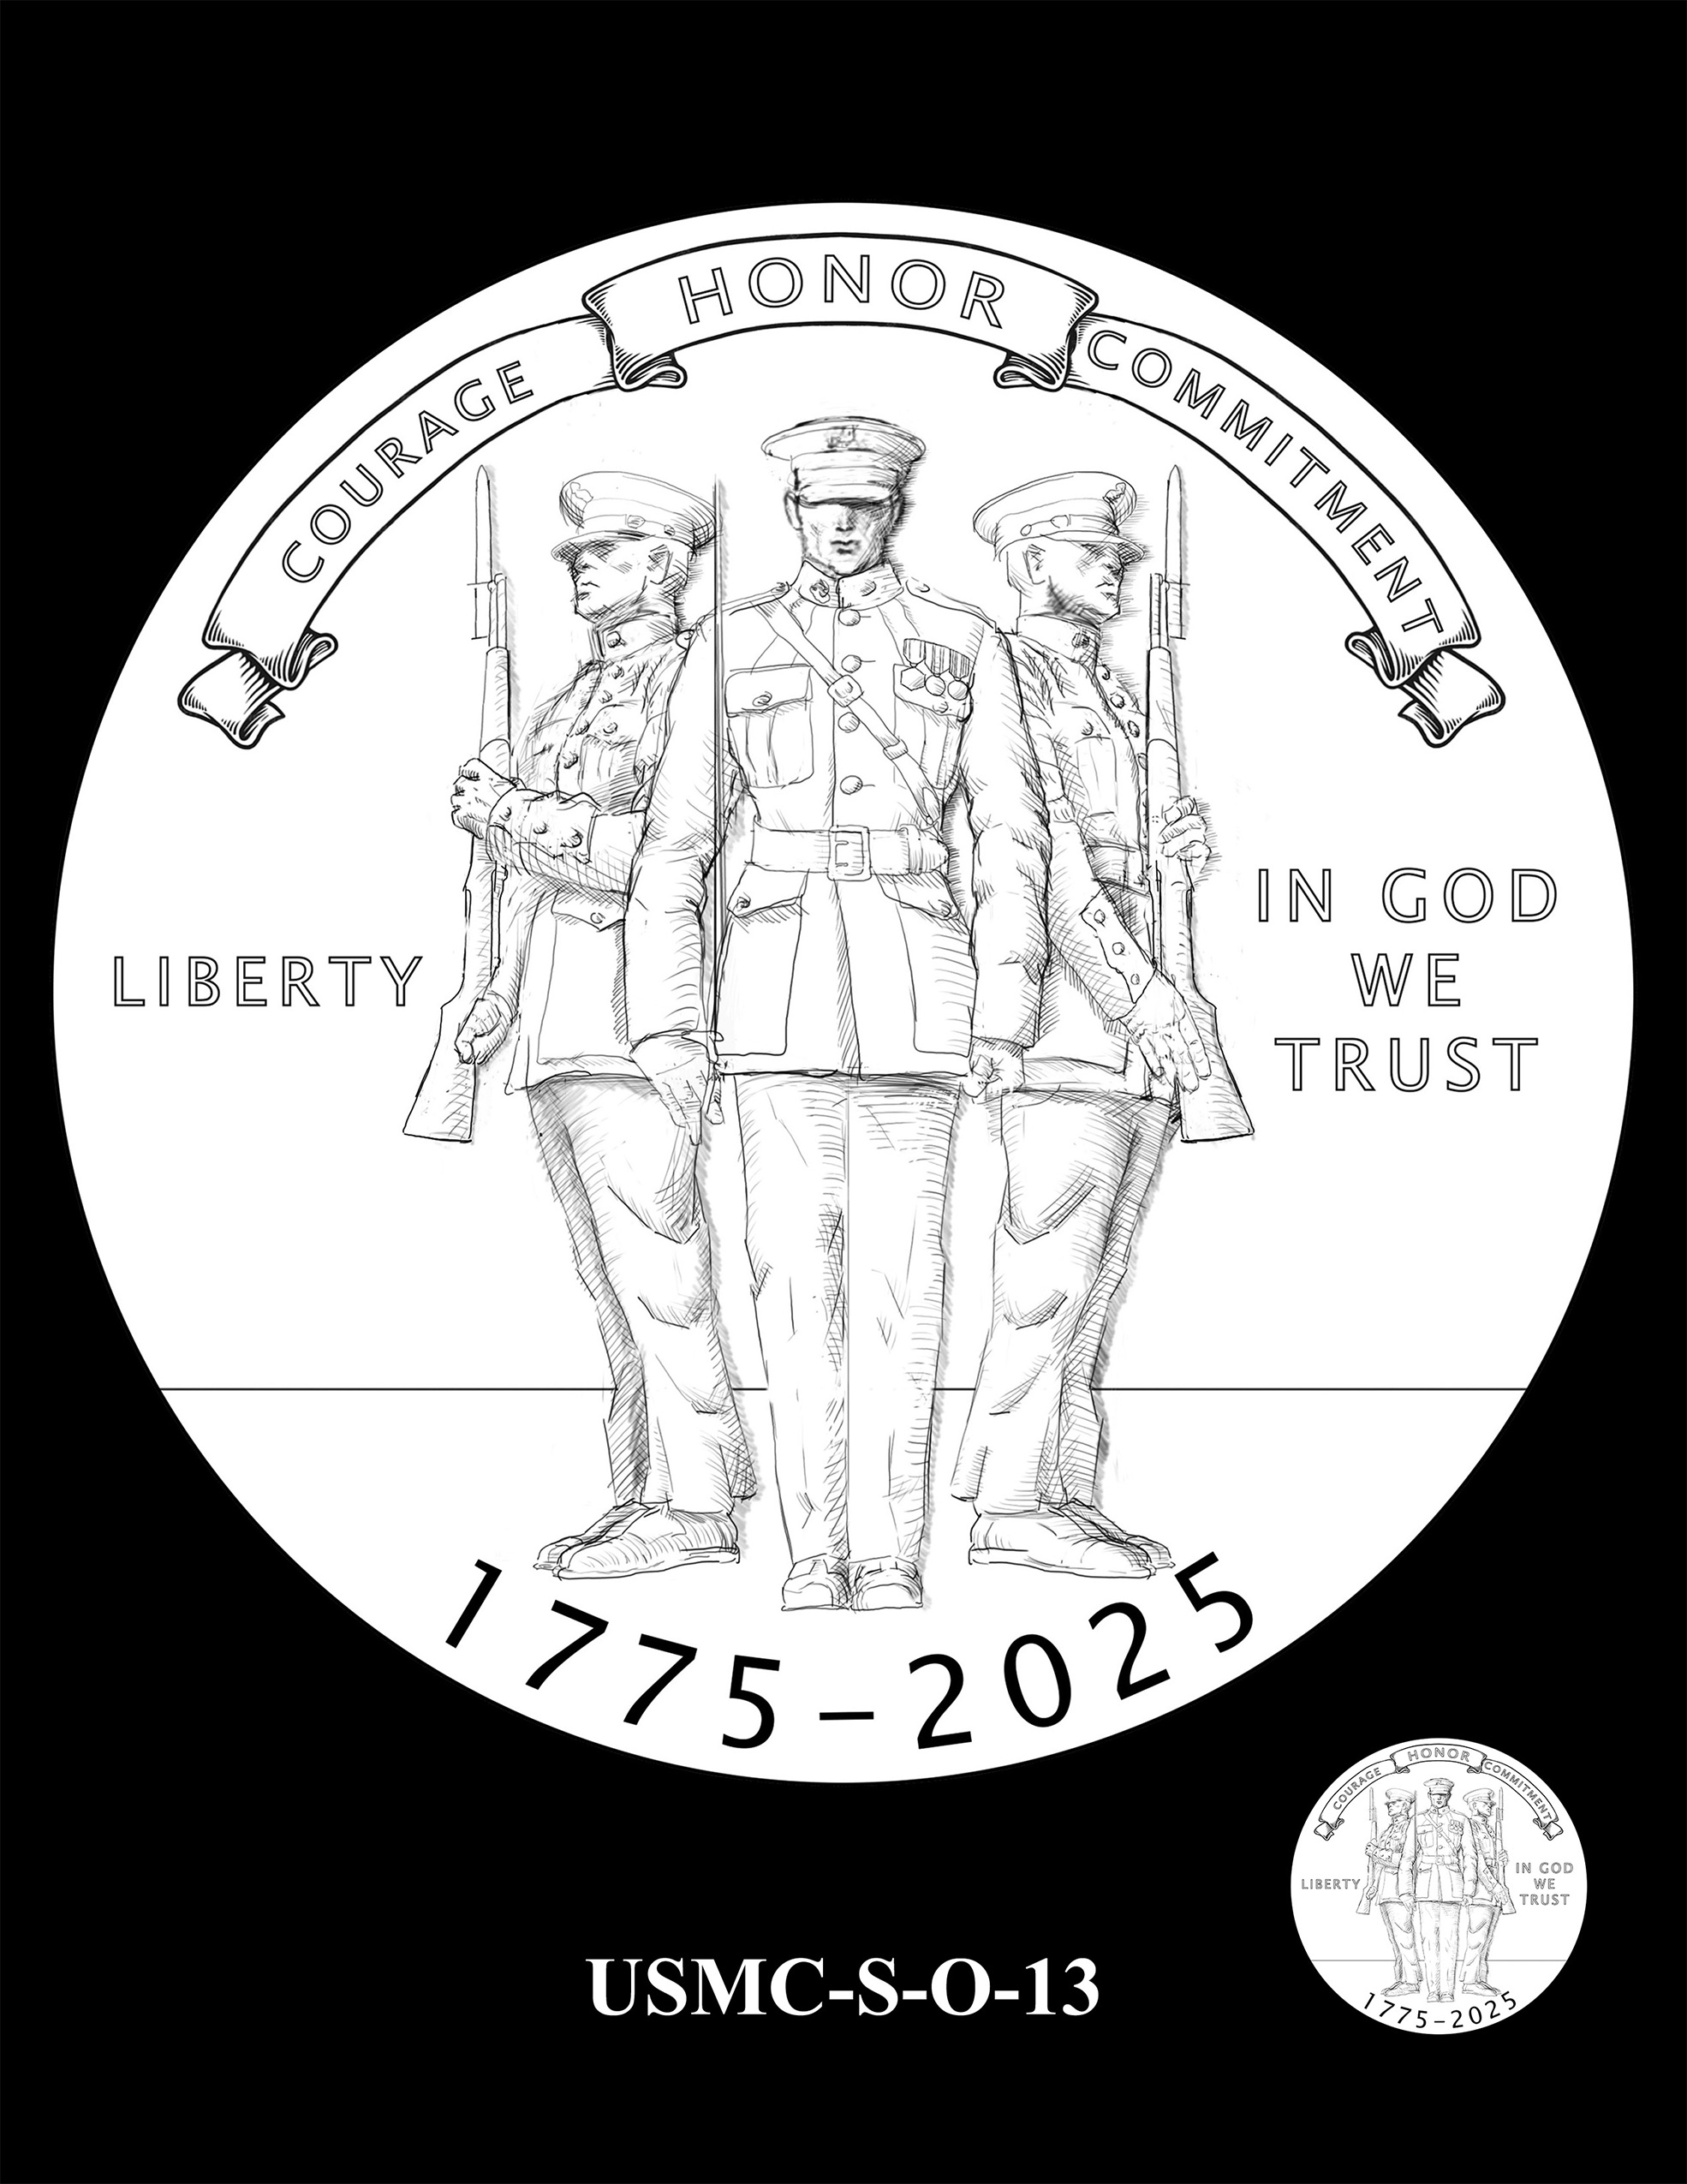 USMC-S-O-13 -- 250th Anniversary of the United States Marine Corps - Silver